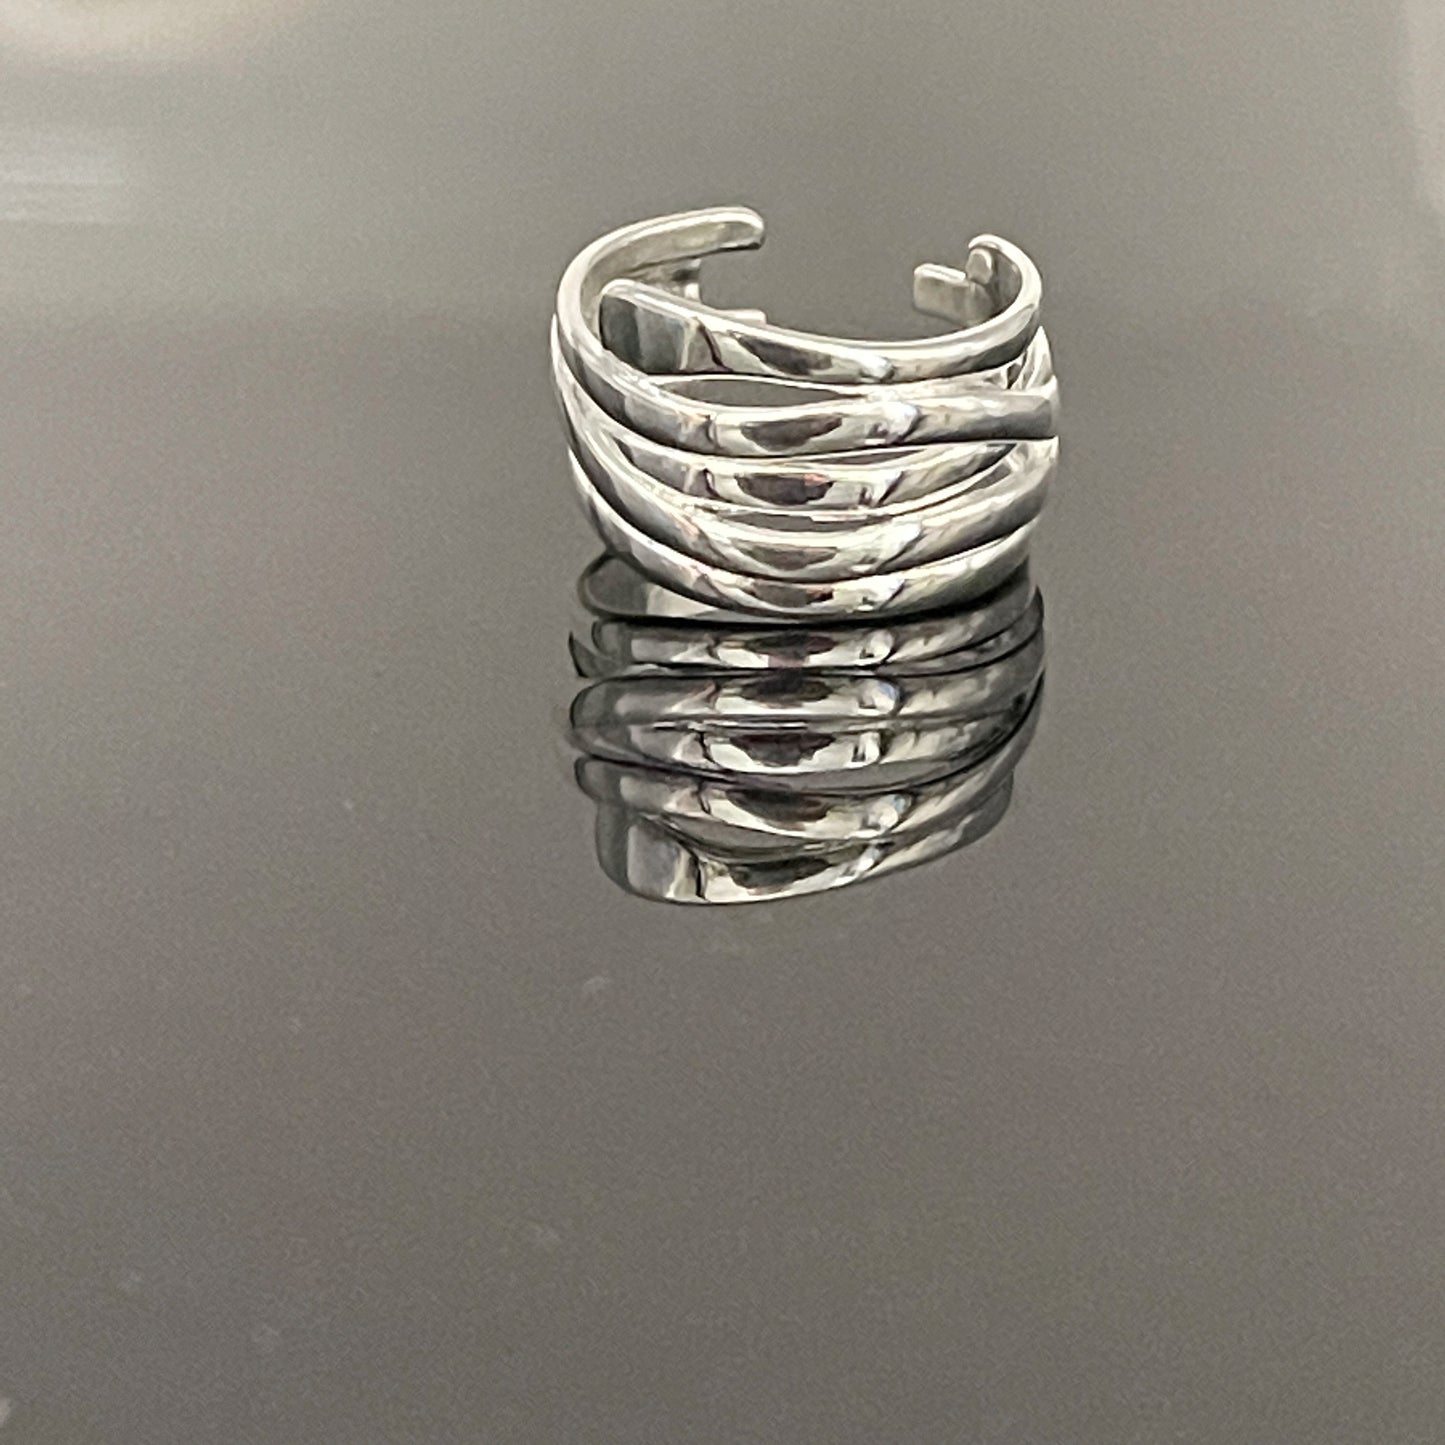 Niagra Sterling Silver Wrap Ring